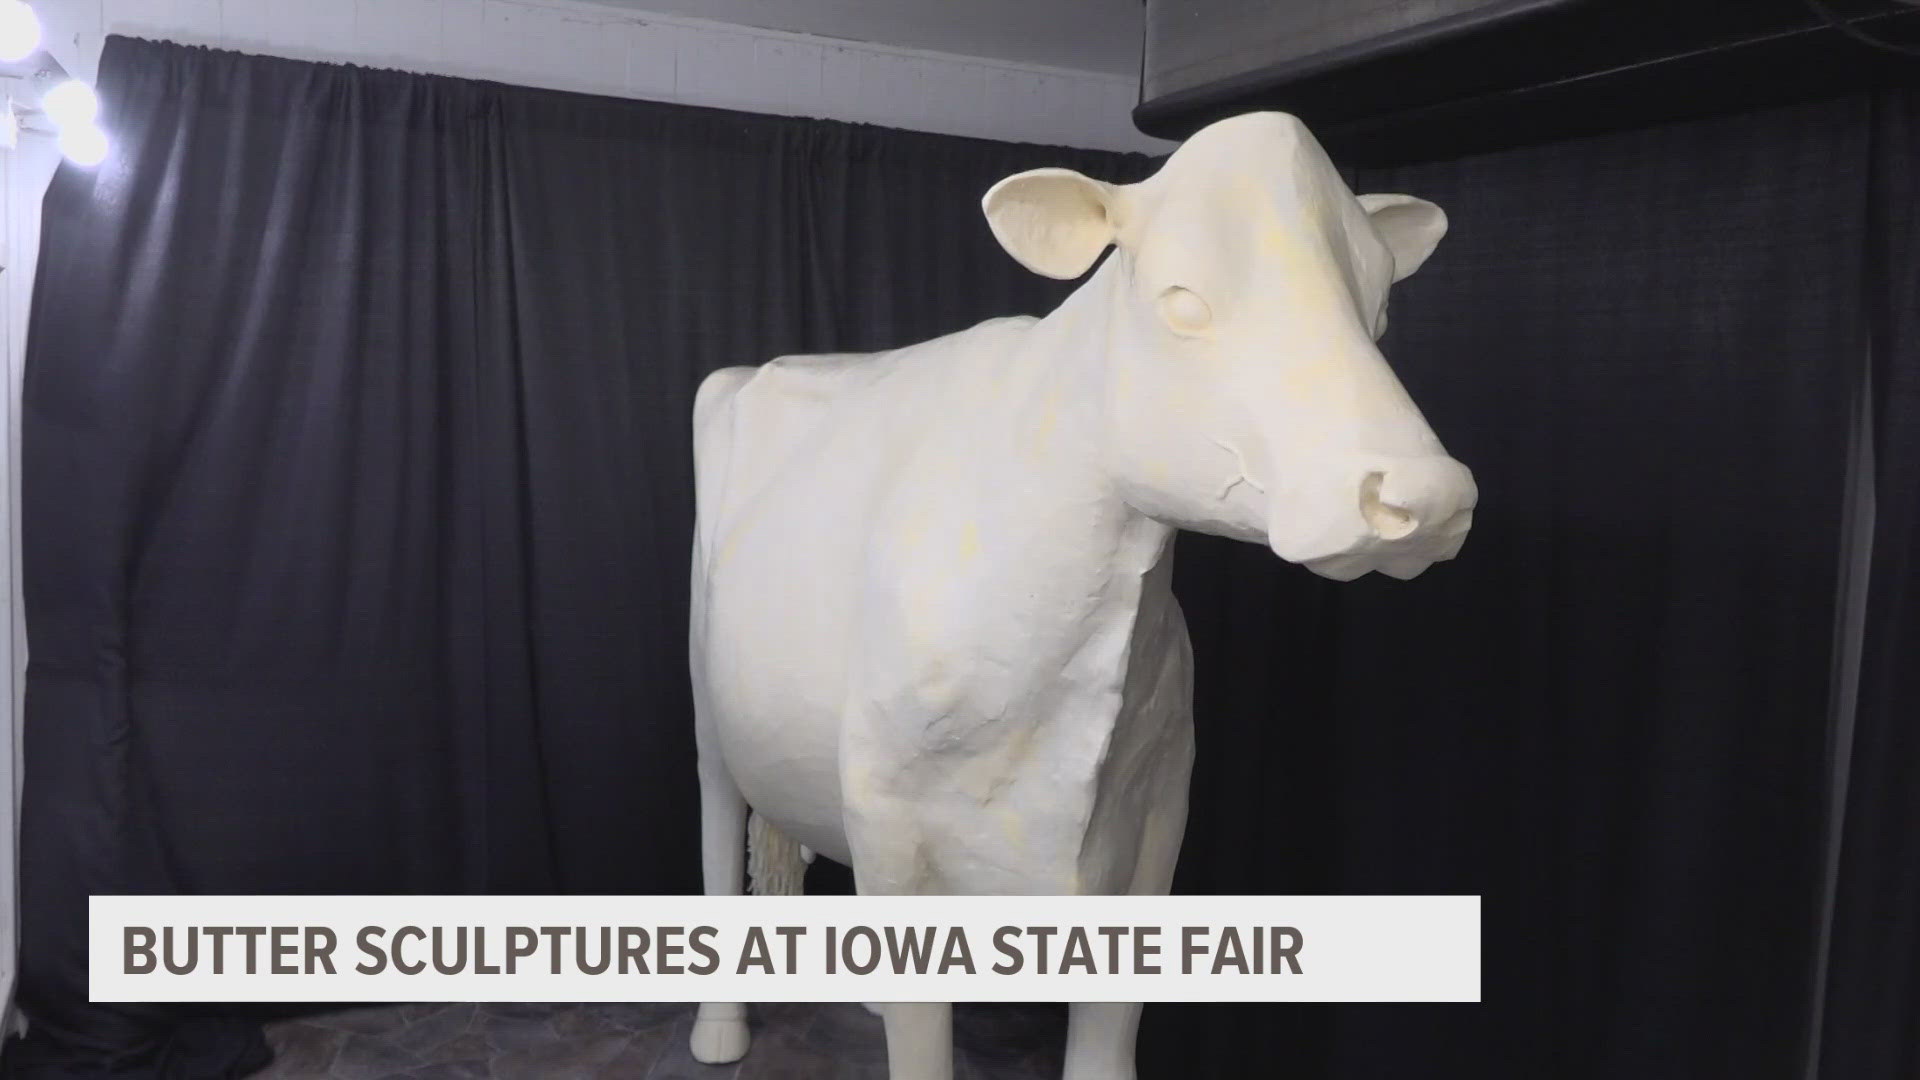 Butter sculptors will also create a likeness of Iowan Steve Higgins, the announcer and producer of "The Tonight Show", as well as a sky glider seat.